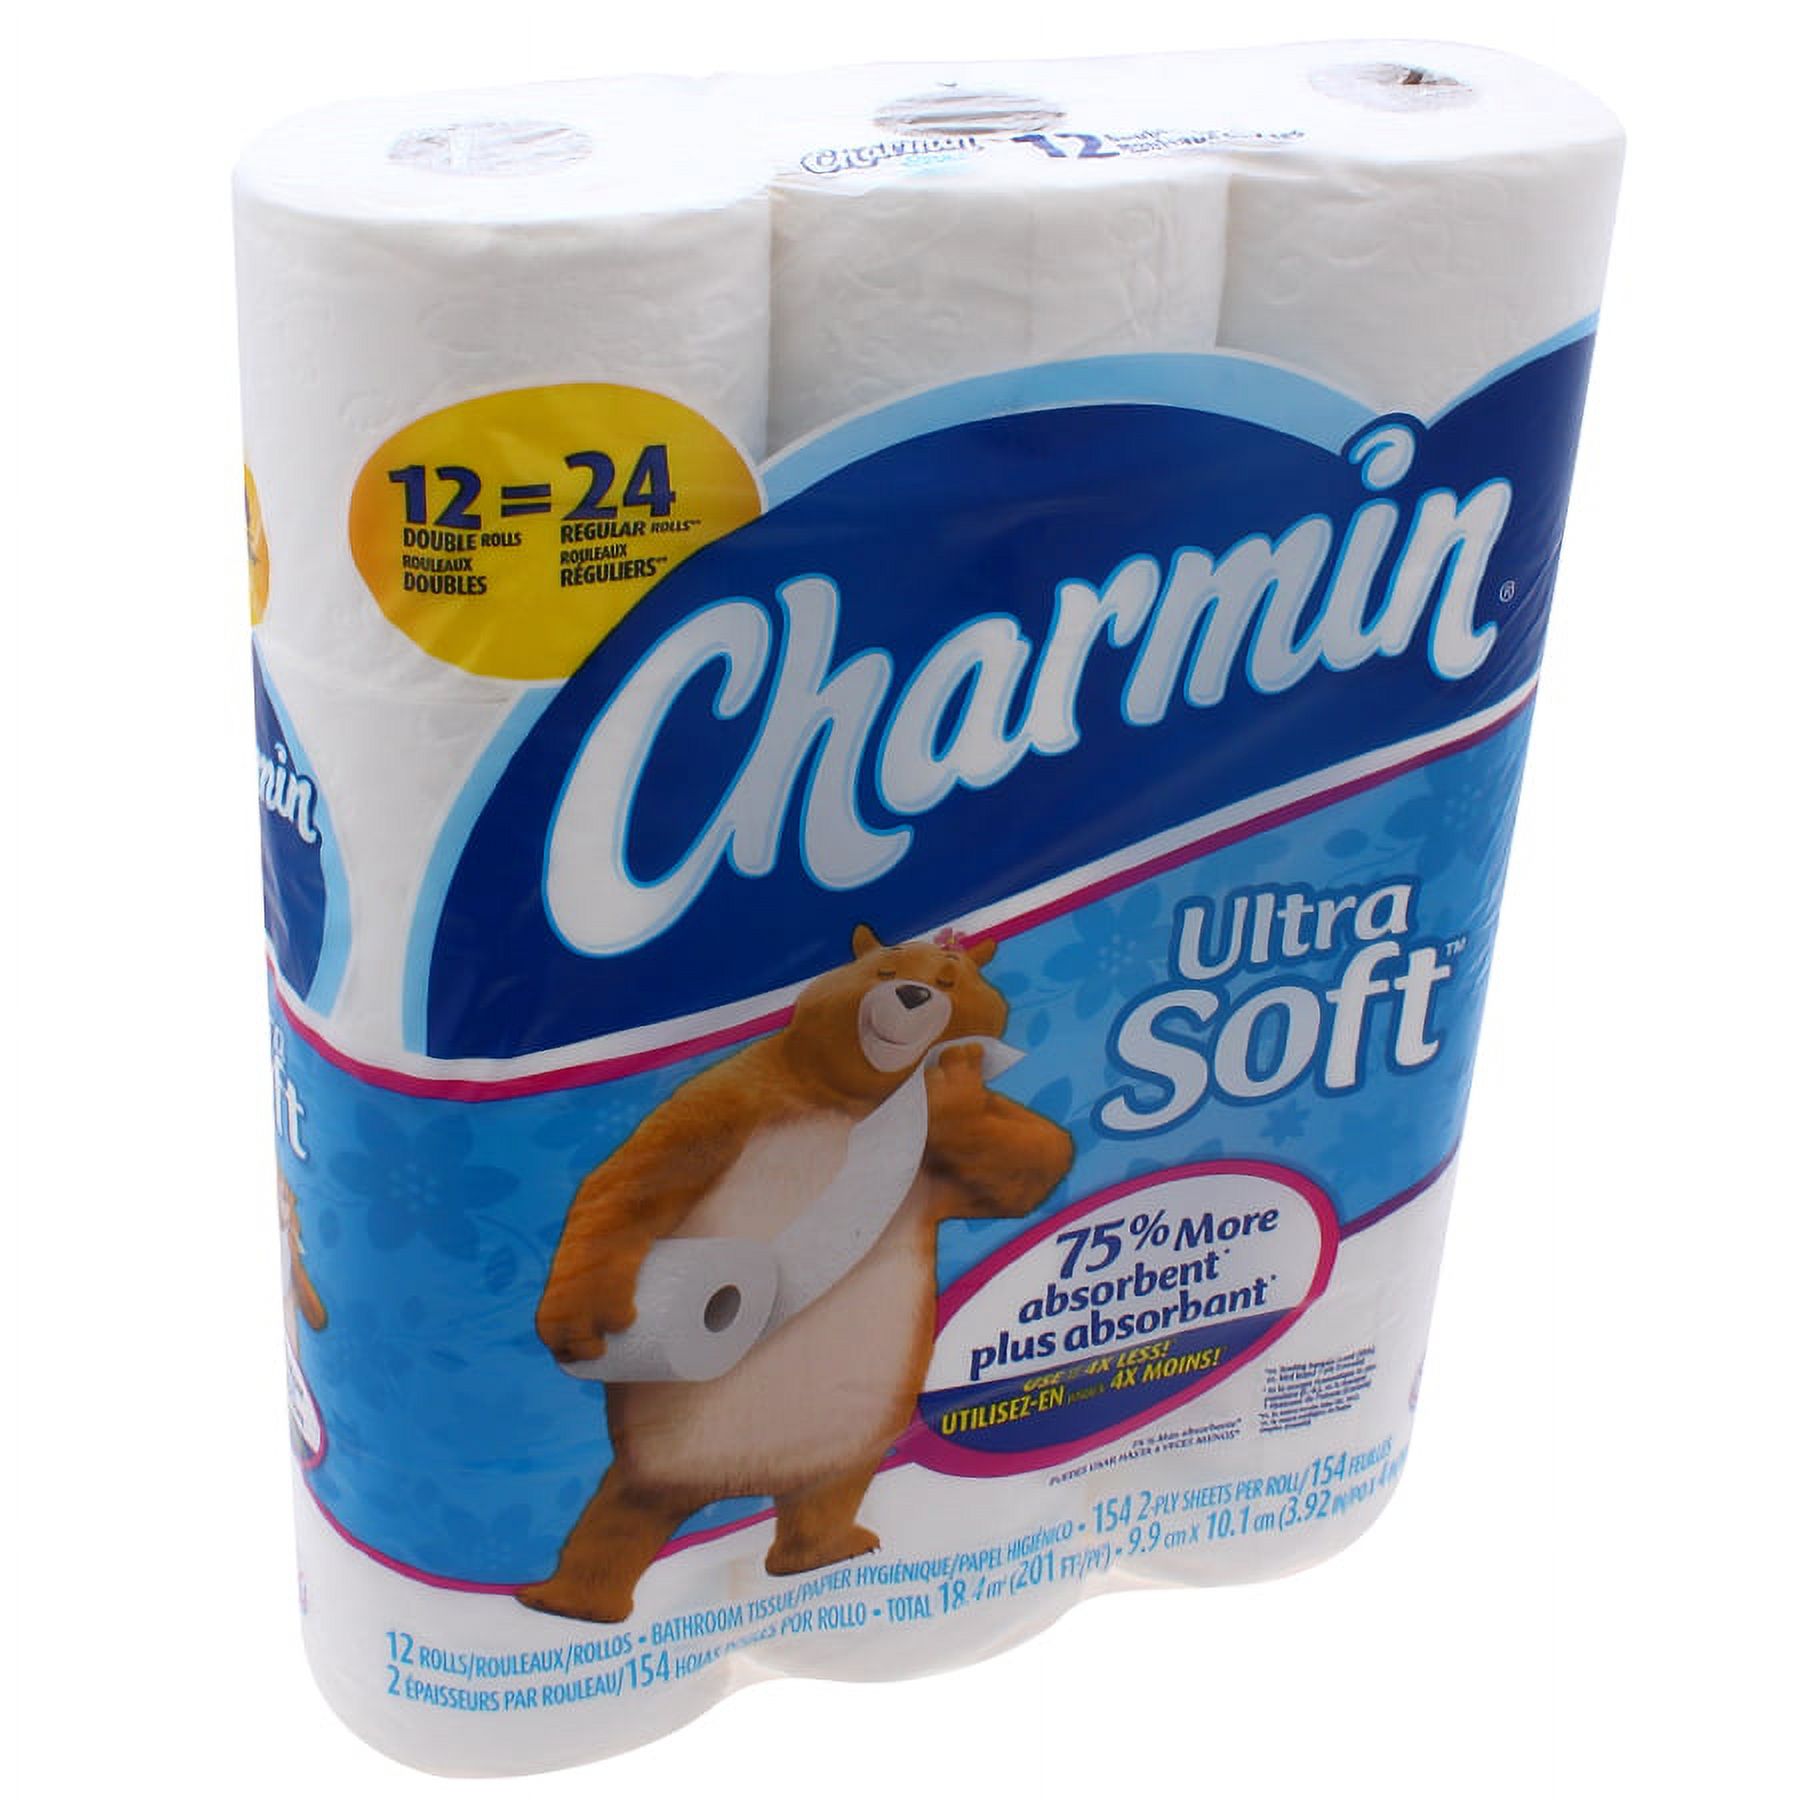 Charmin Ultra Soft Toilet Paper, 12 Double Rolls - image 3 of 4